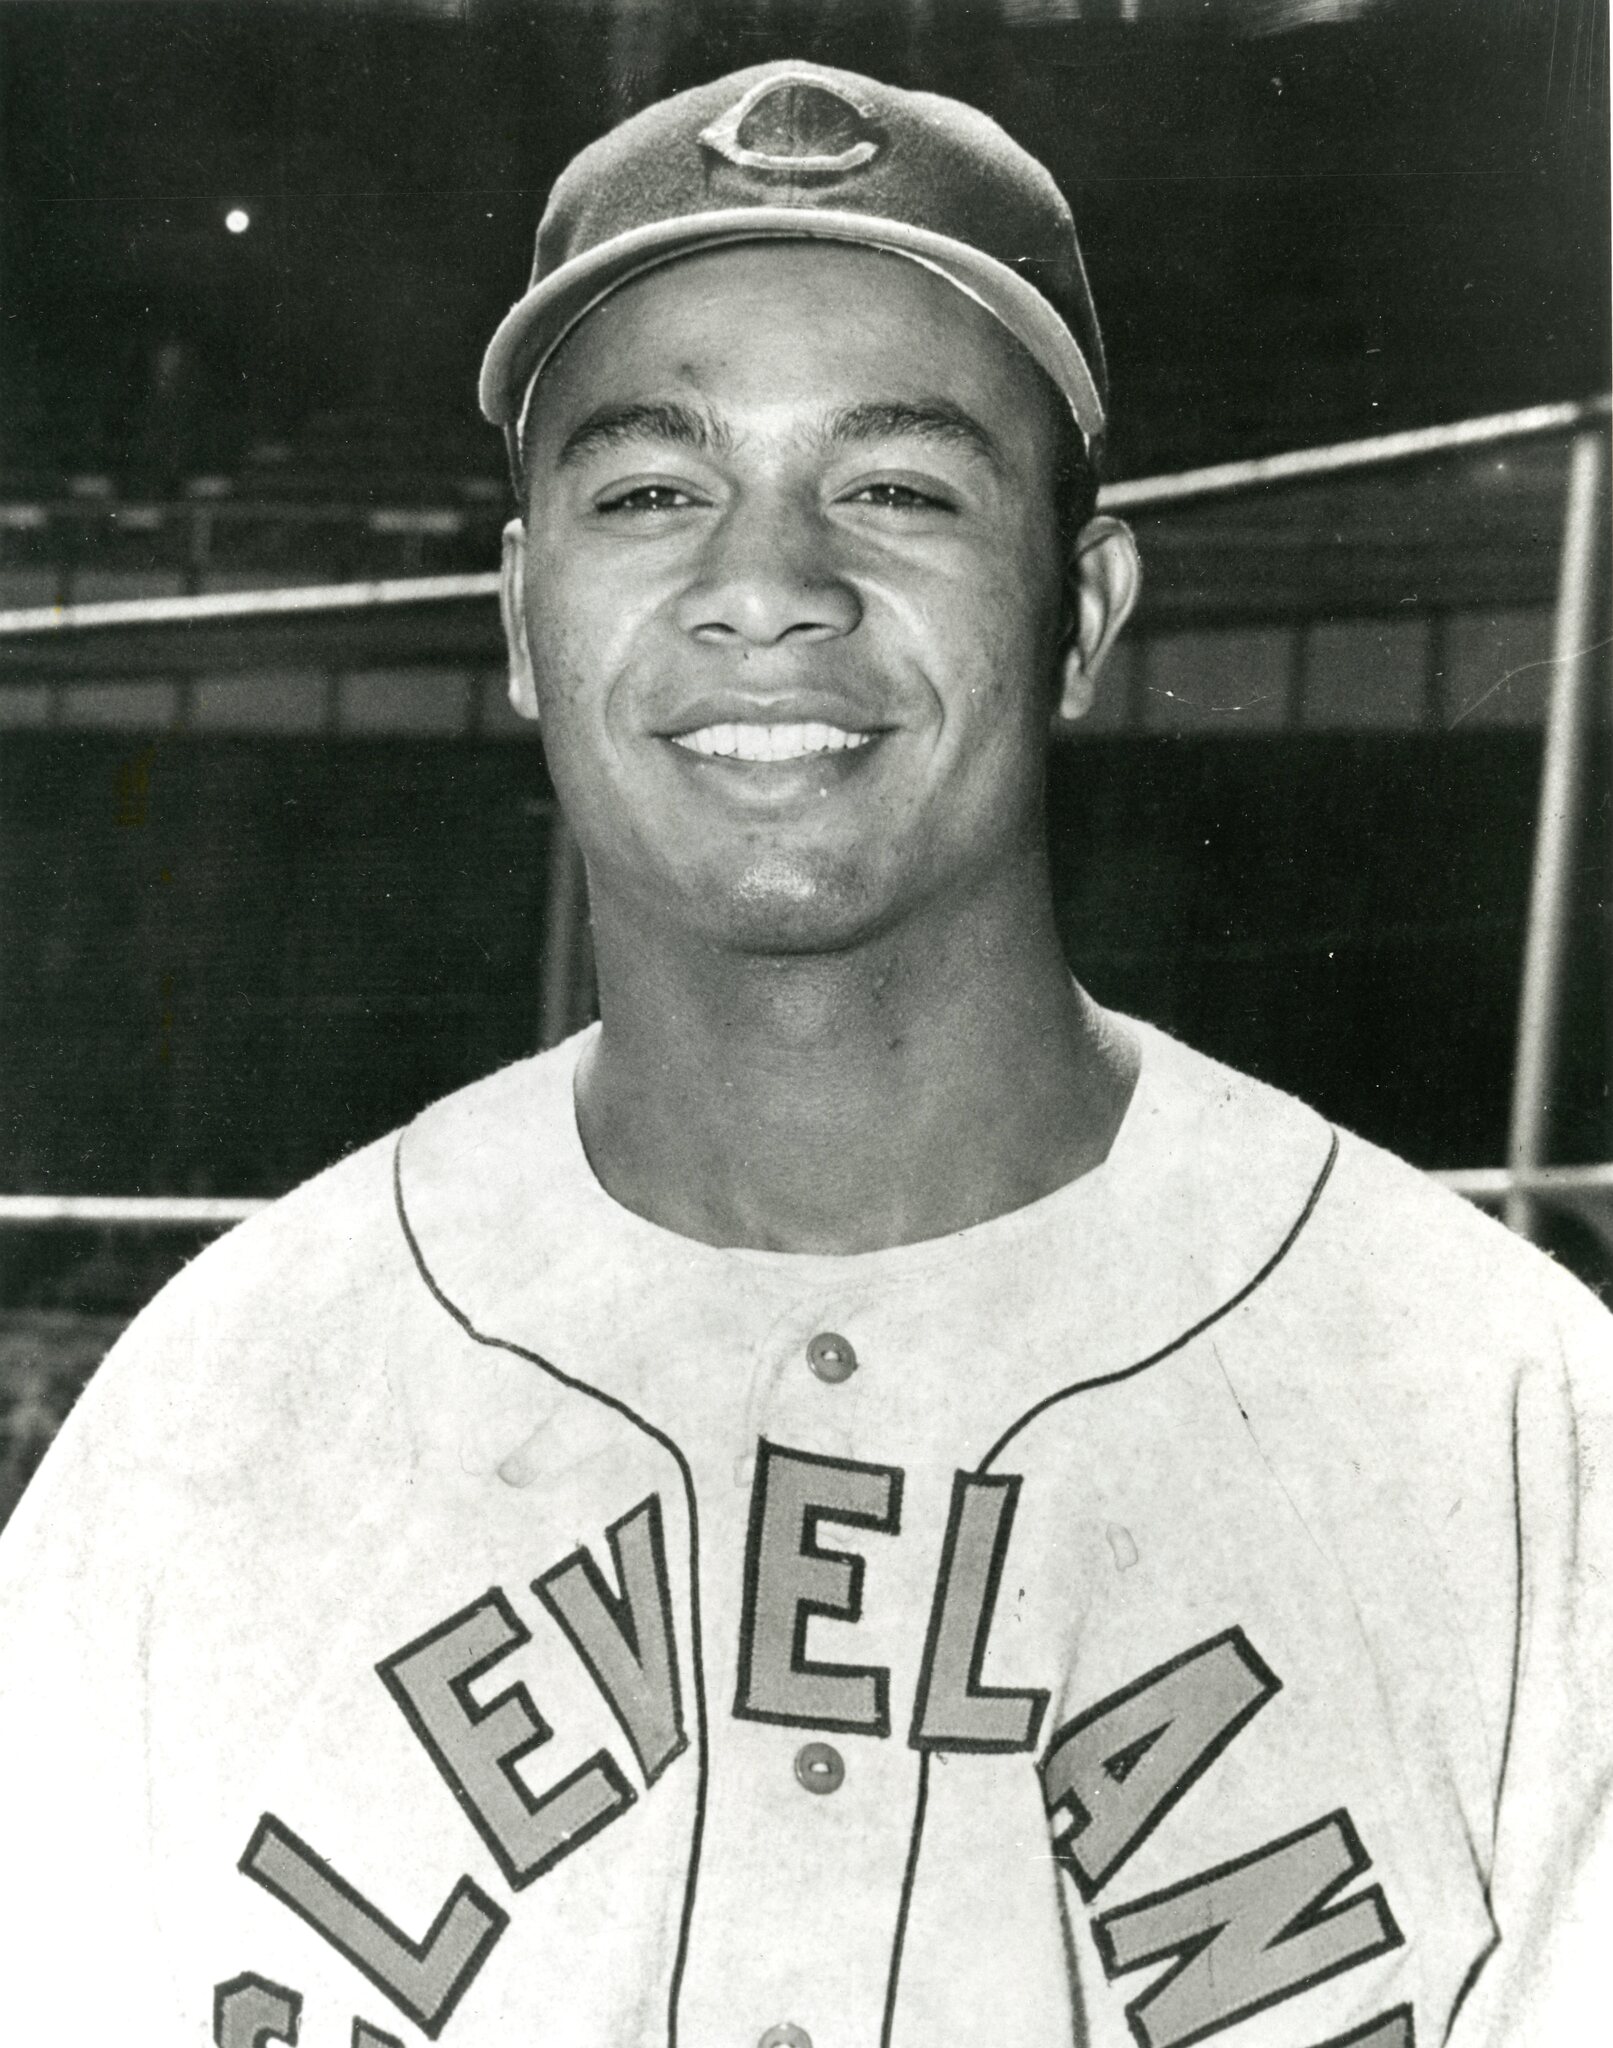 Larry Doby's challenging route to the Cleveland Indians and MLB